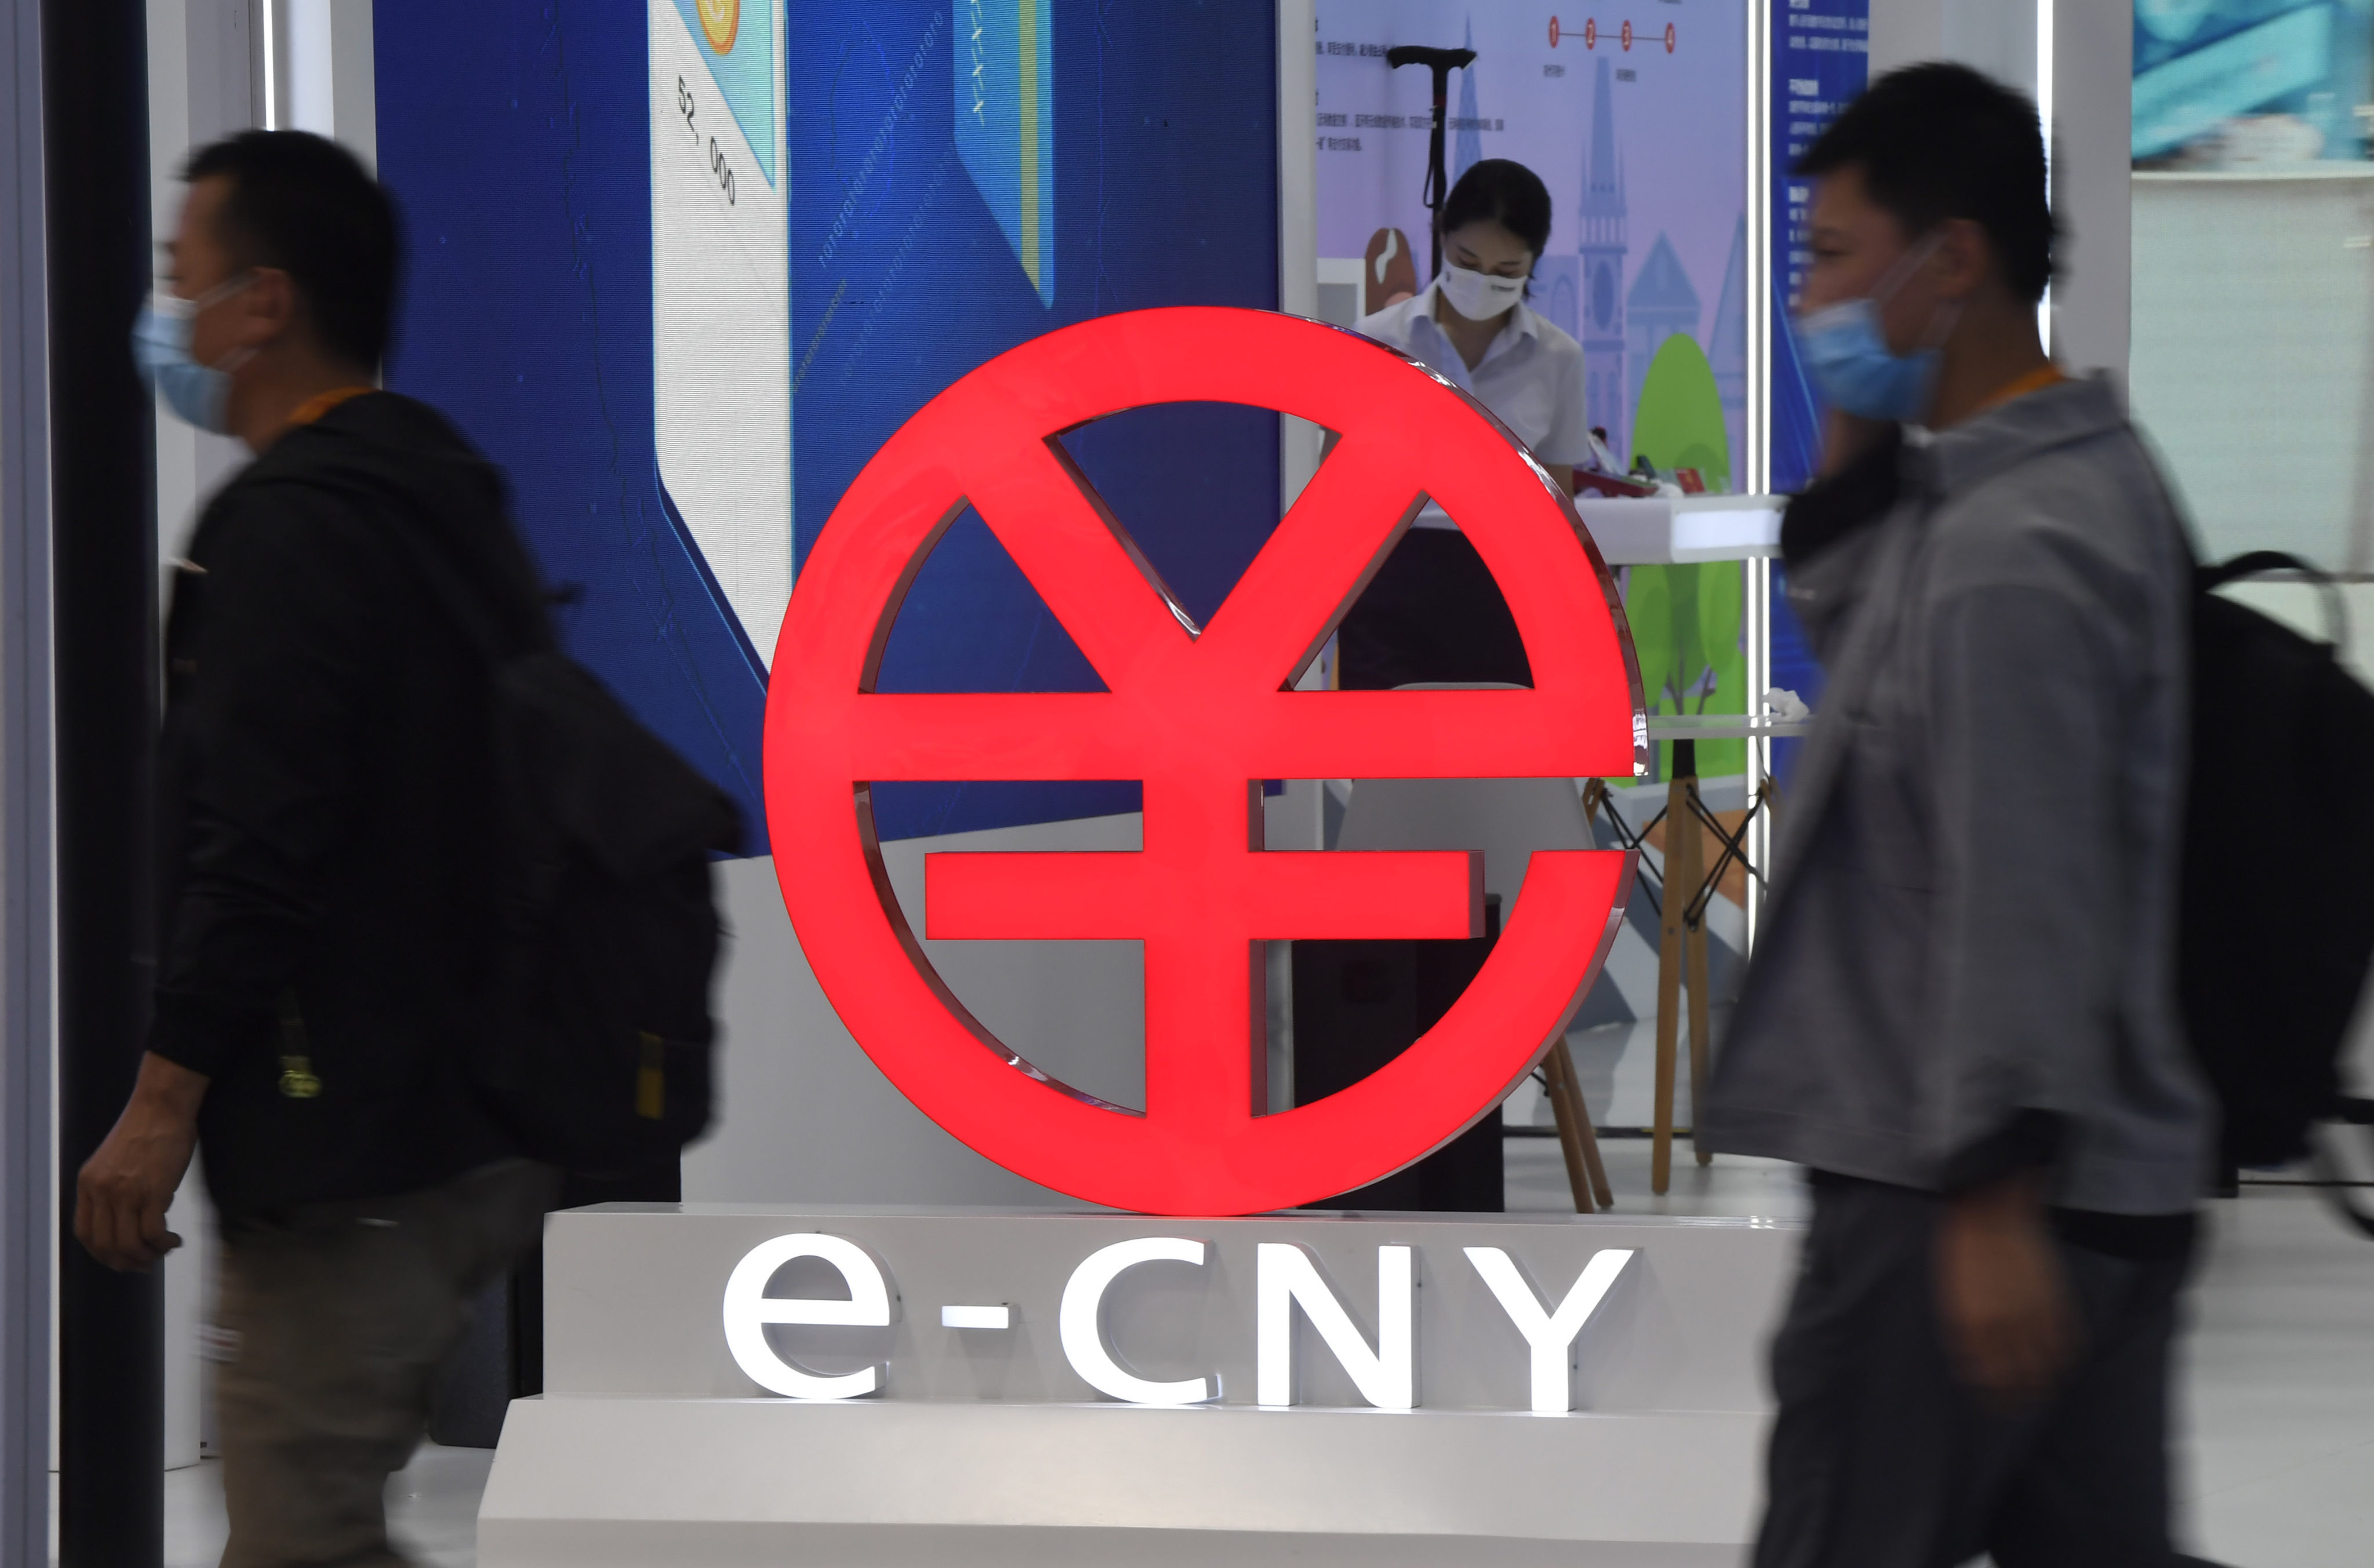 People walk past a digital yuan (e-CNY) sign during the China International Fair for Trade in Services (CIFTIS) in Beijing on September 5, 2021. Photo: Xinhua